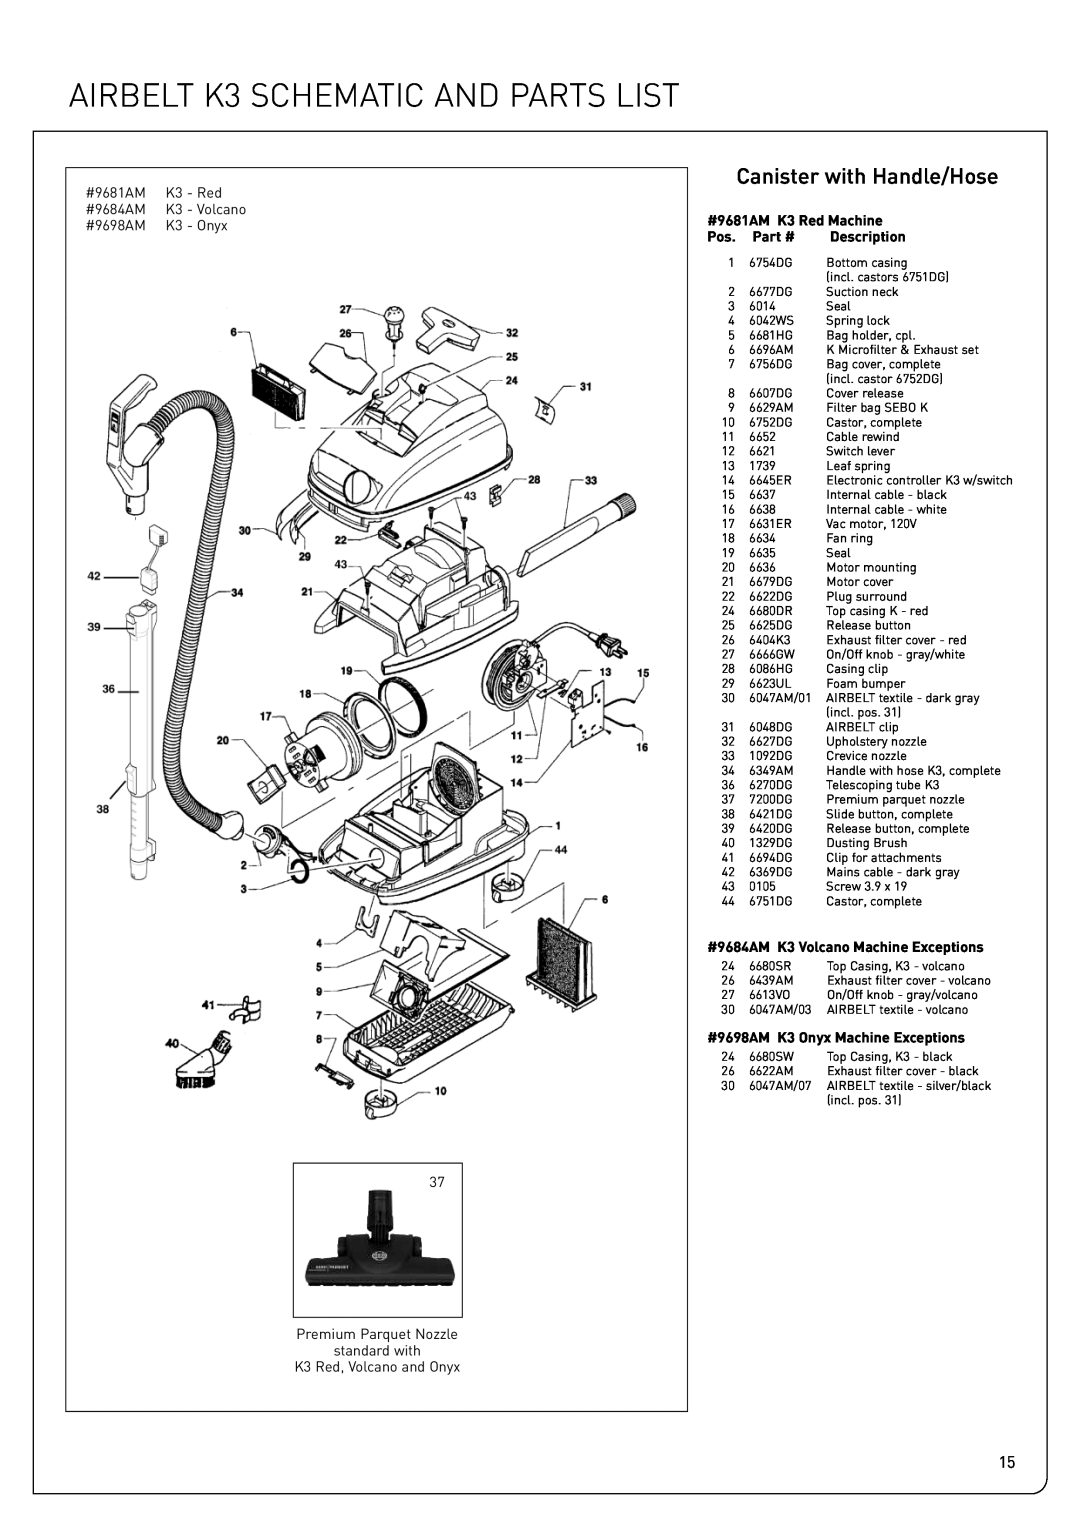 Sebo K2 owner manual AIRBELT K3 SCHEMATIC AND PARTS LIST, Canister with Handle/Hose, #9681AM K3 Red Machine, Description 